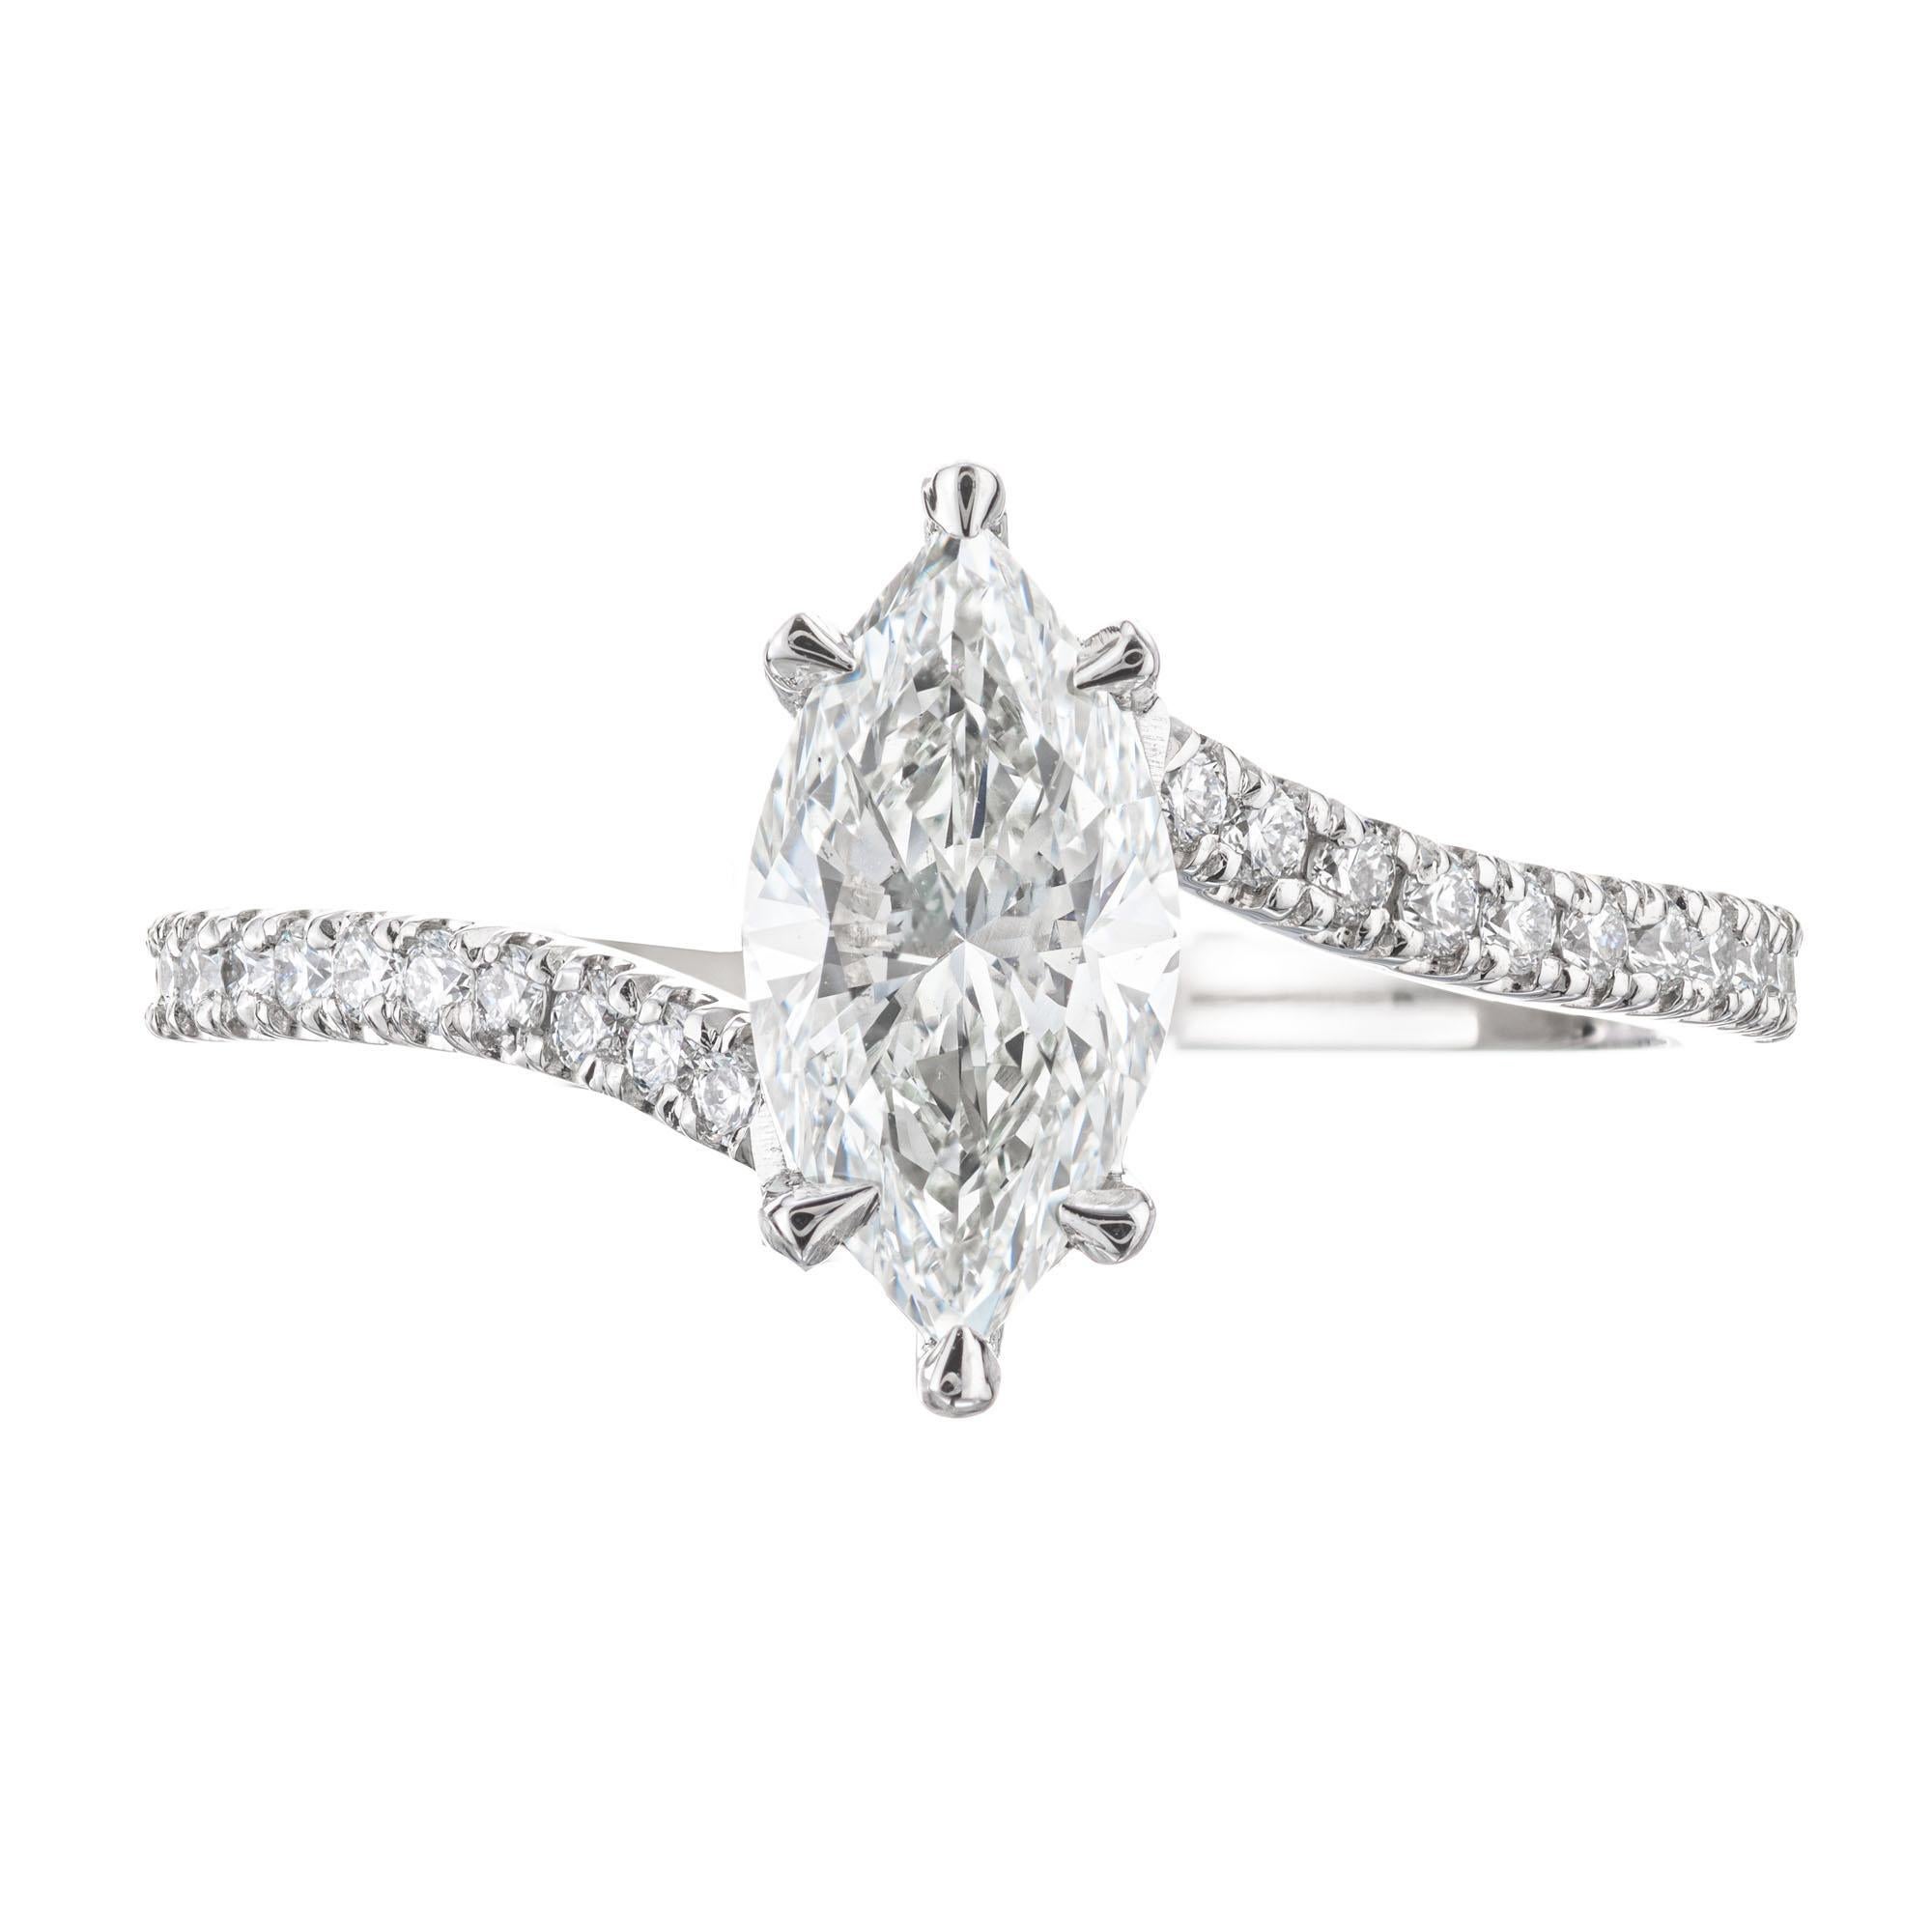 Marquise cut diamond engagement ring. GIA certified 1.01 center diamond in a solitaire bi-pass style platinum setting with 36 round brilliant cut accent diamonds along the shank.  Created in the Peter Suchy Workshop. 

1 marquise brilliant cut